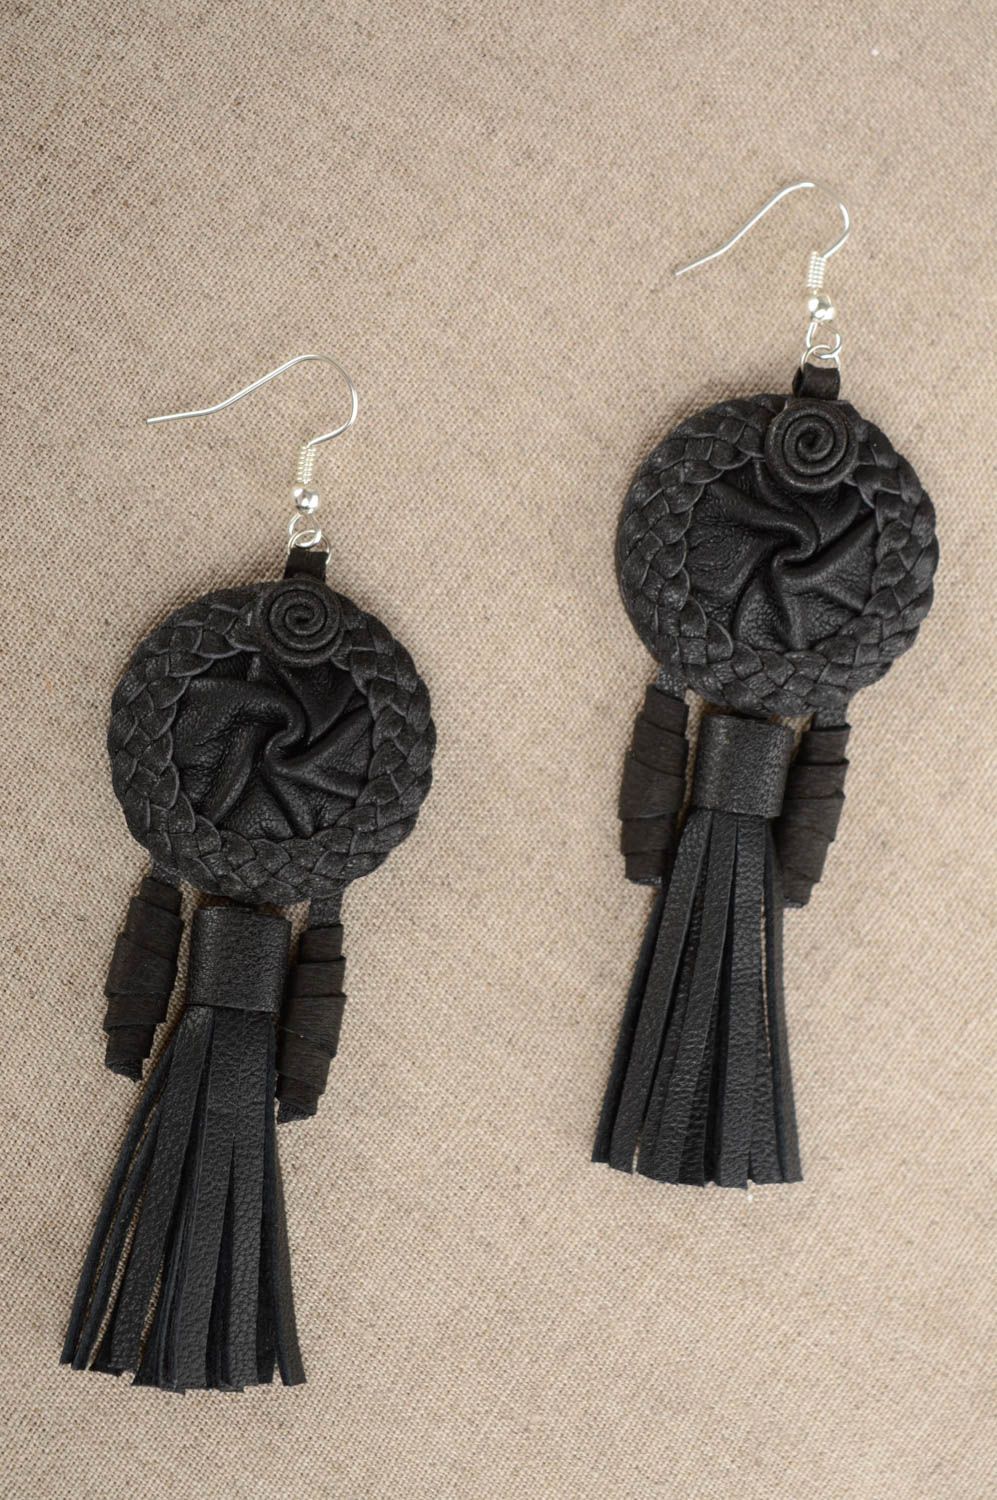 Leather earrings made using weaving and applique work techniques photo 4